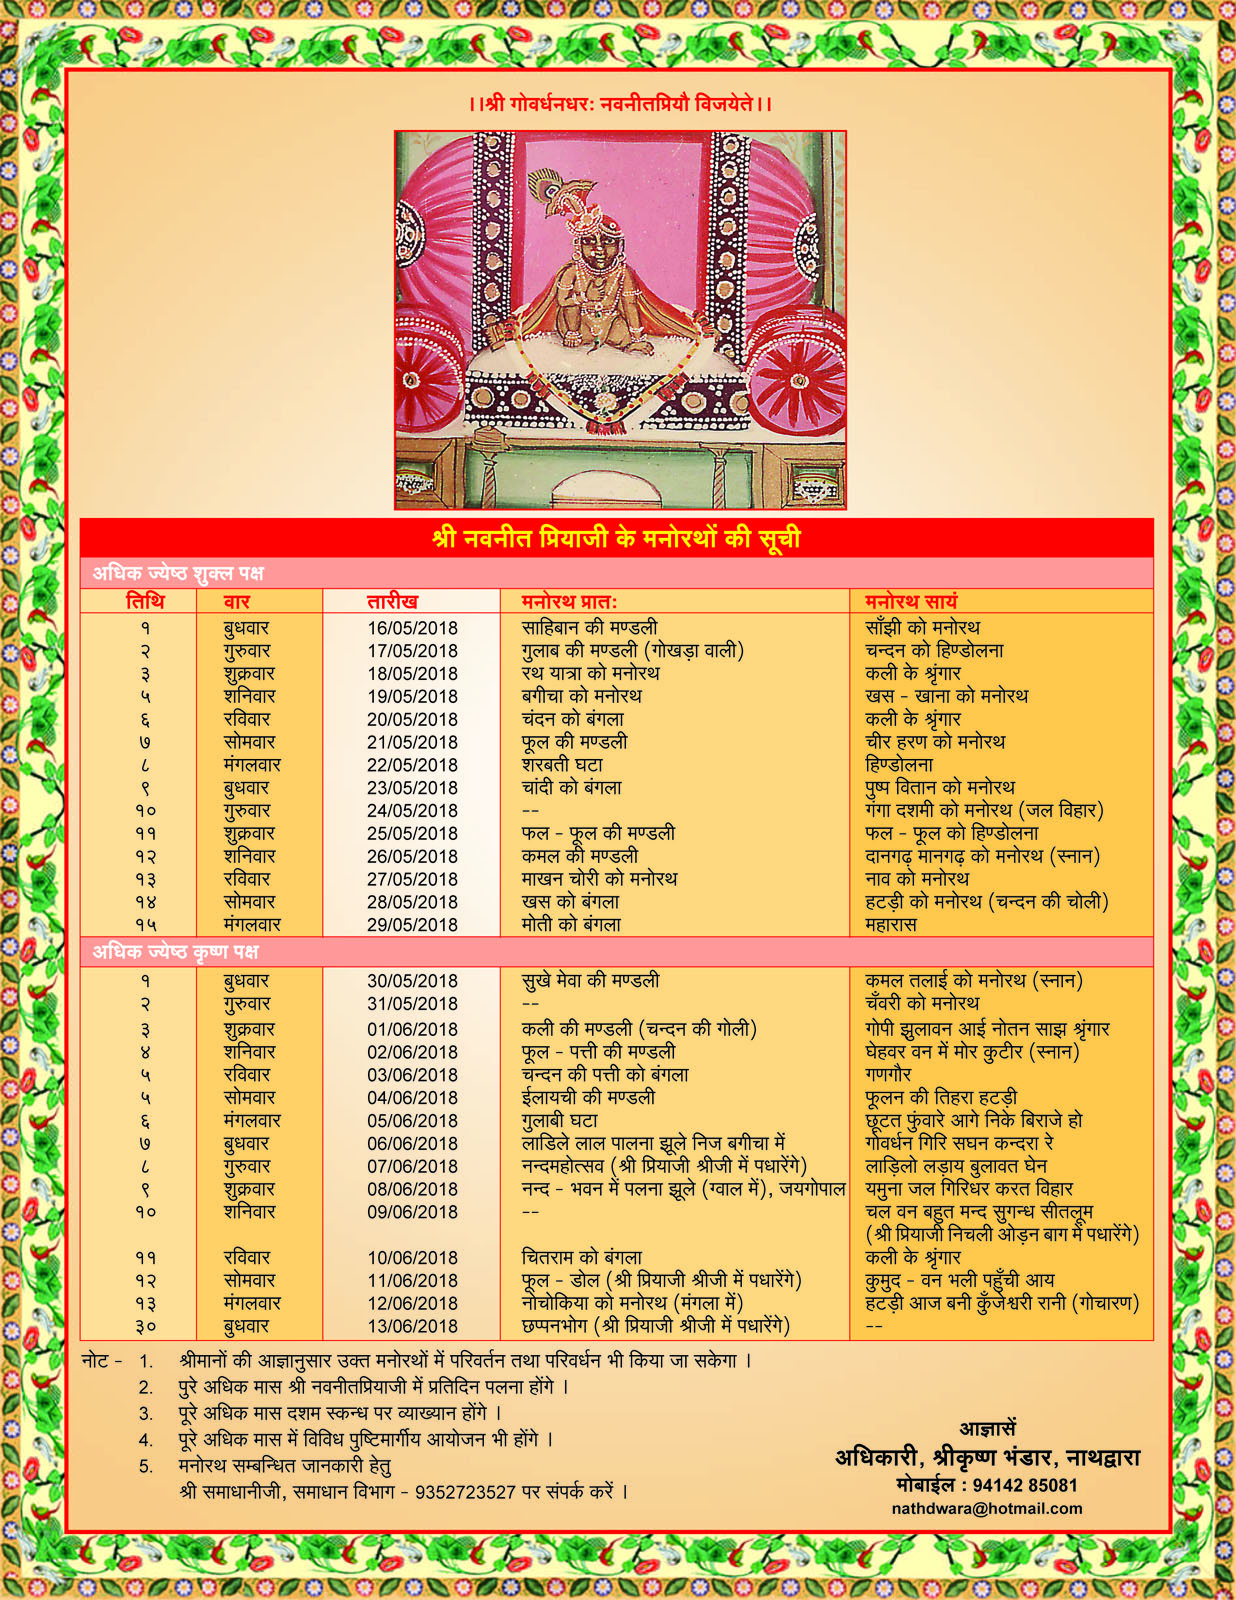 Welcome To Shrinathji Temple Nathdwara Official Web Site